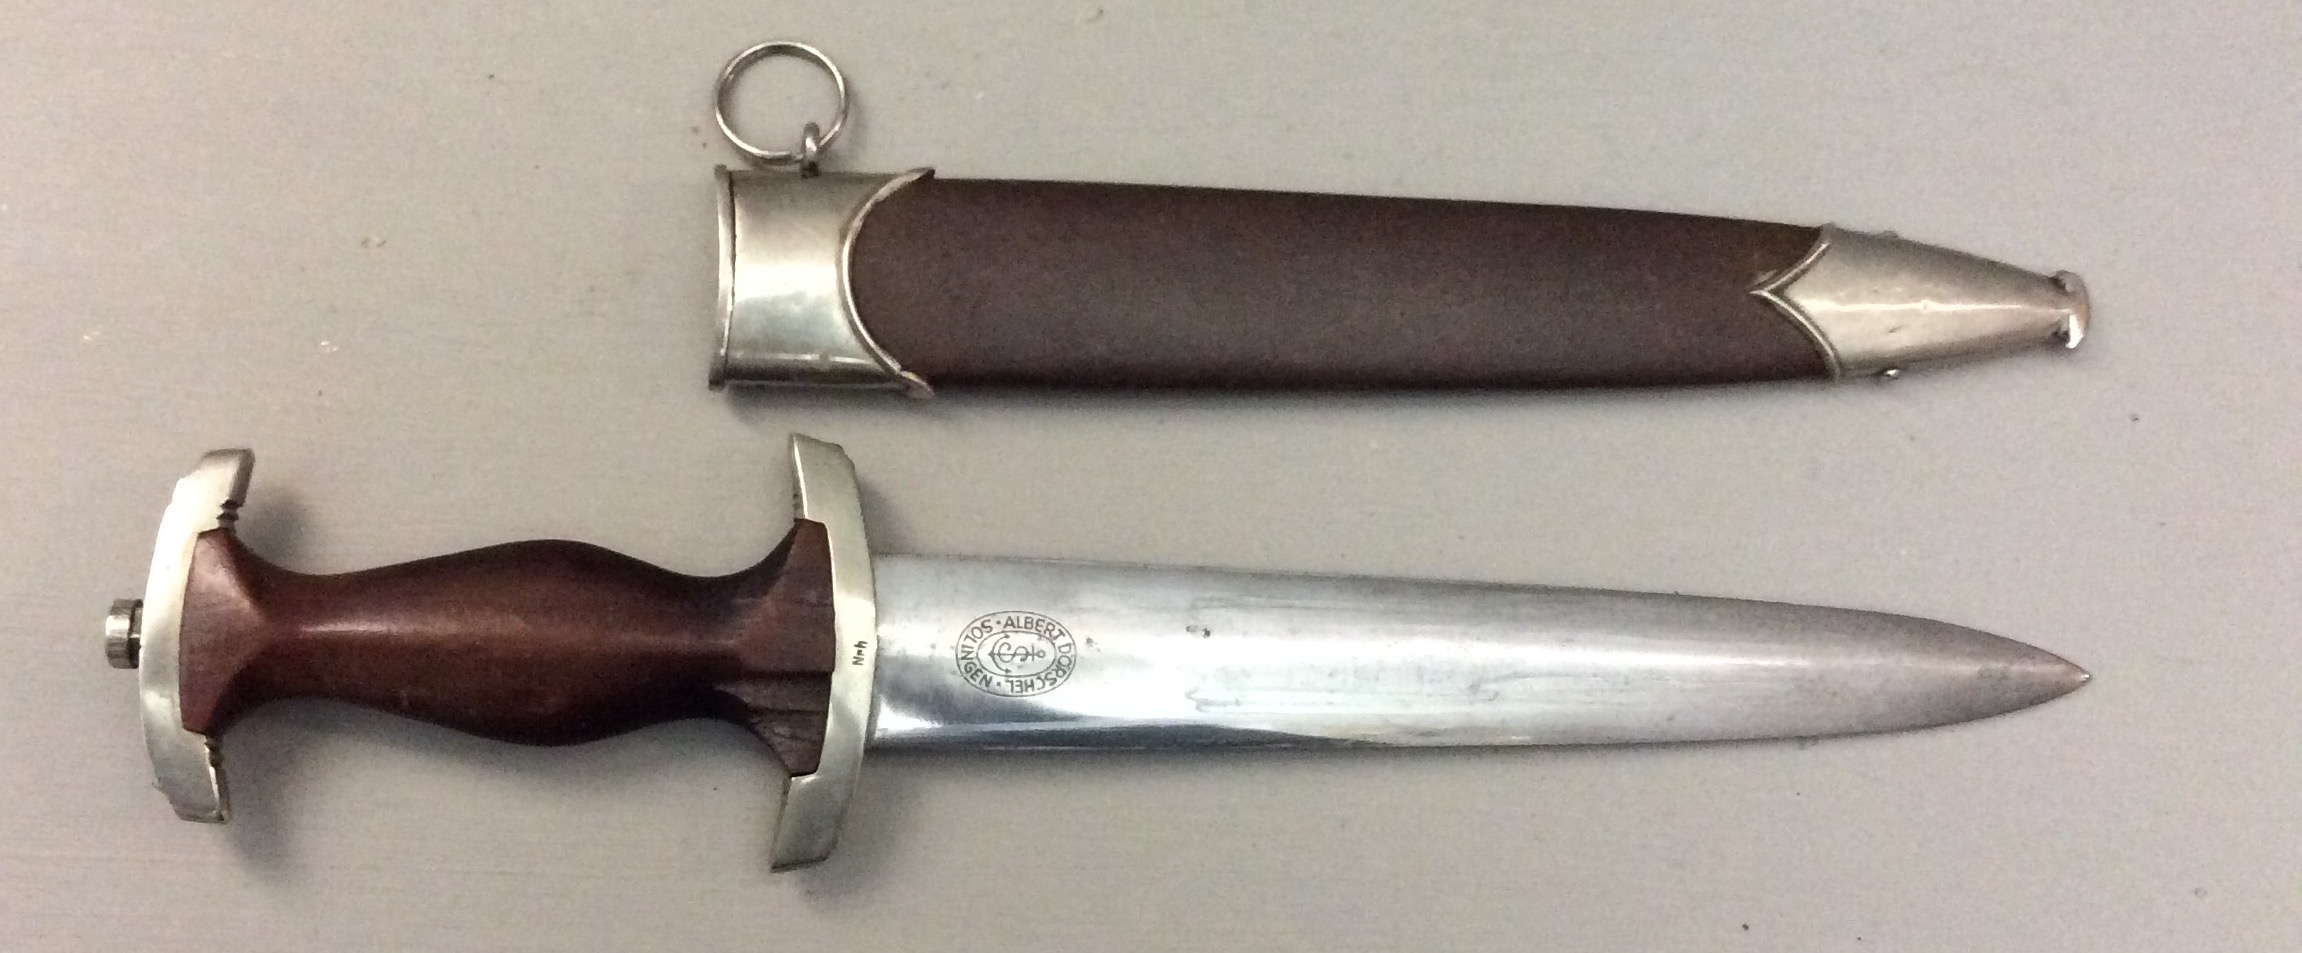 A WORLD WAR II GERMAN SA DAGGER Brown wooden grip with solid nickel fittings and brown leather - Image 5 of 10